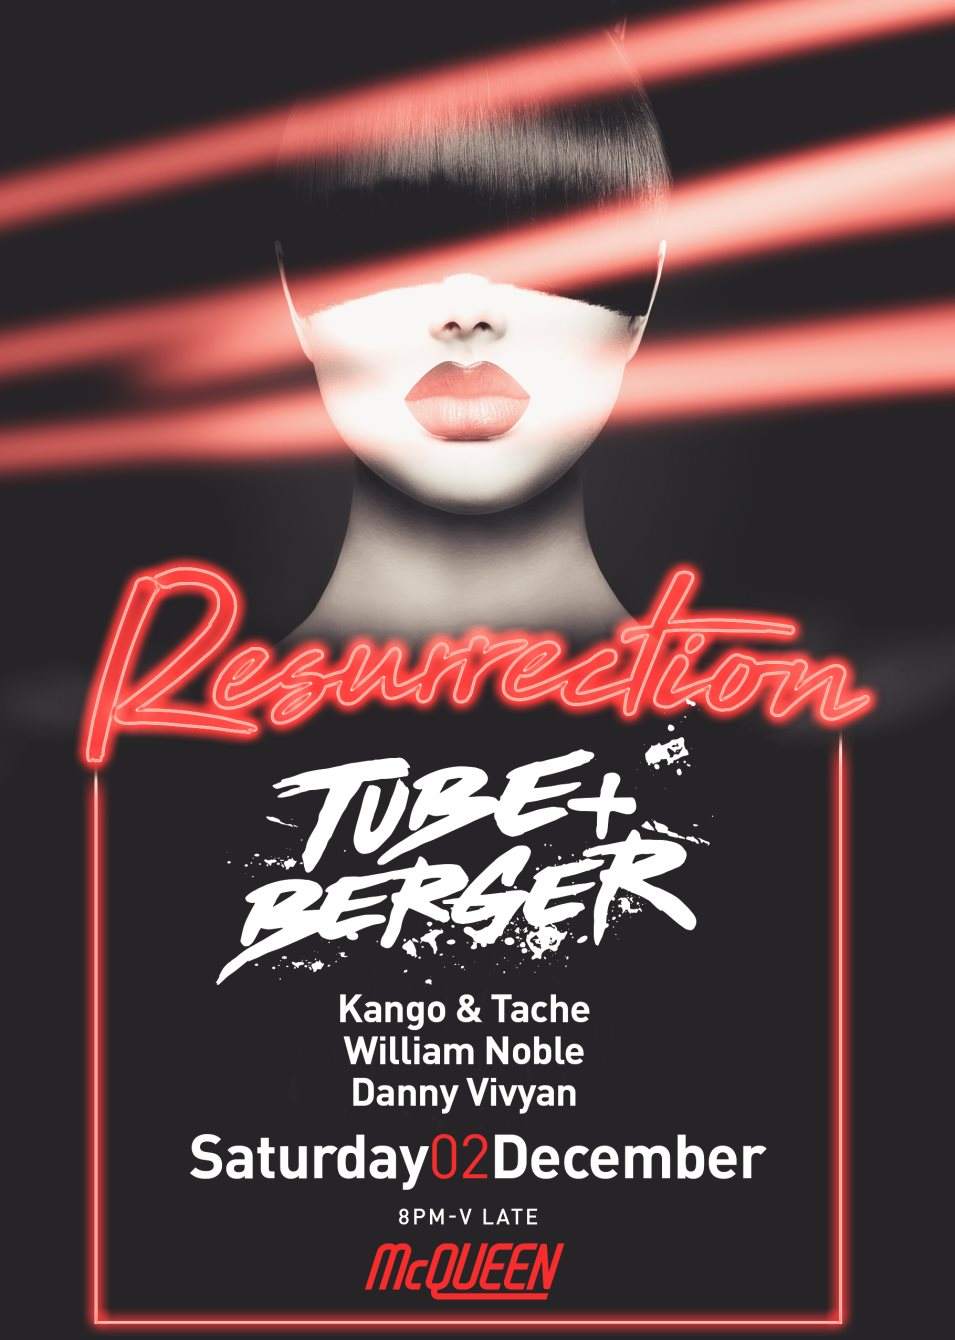 Resurrection with Tube & Berger - Flyer front